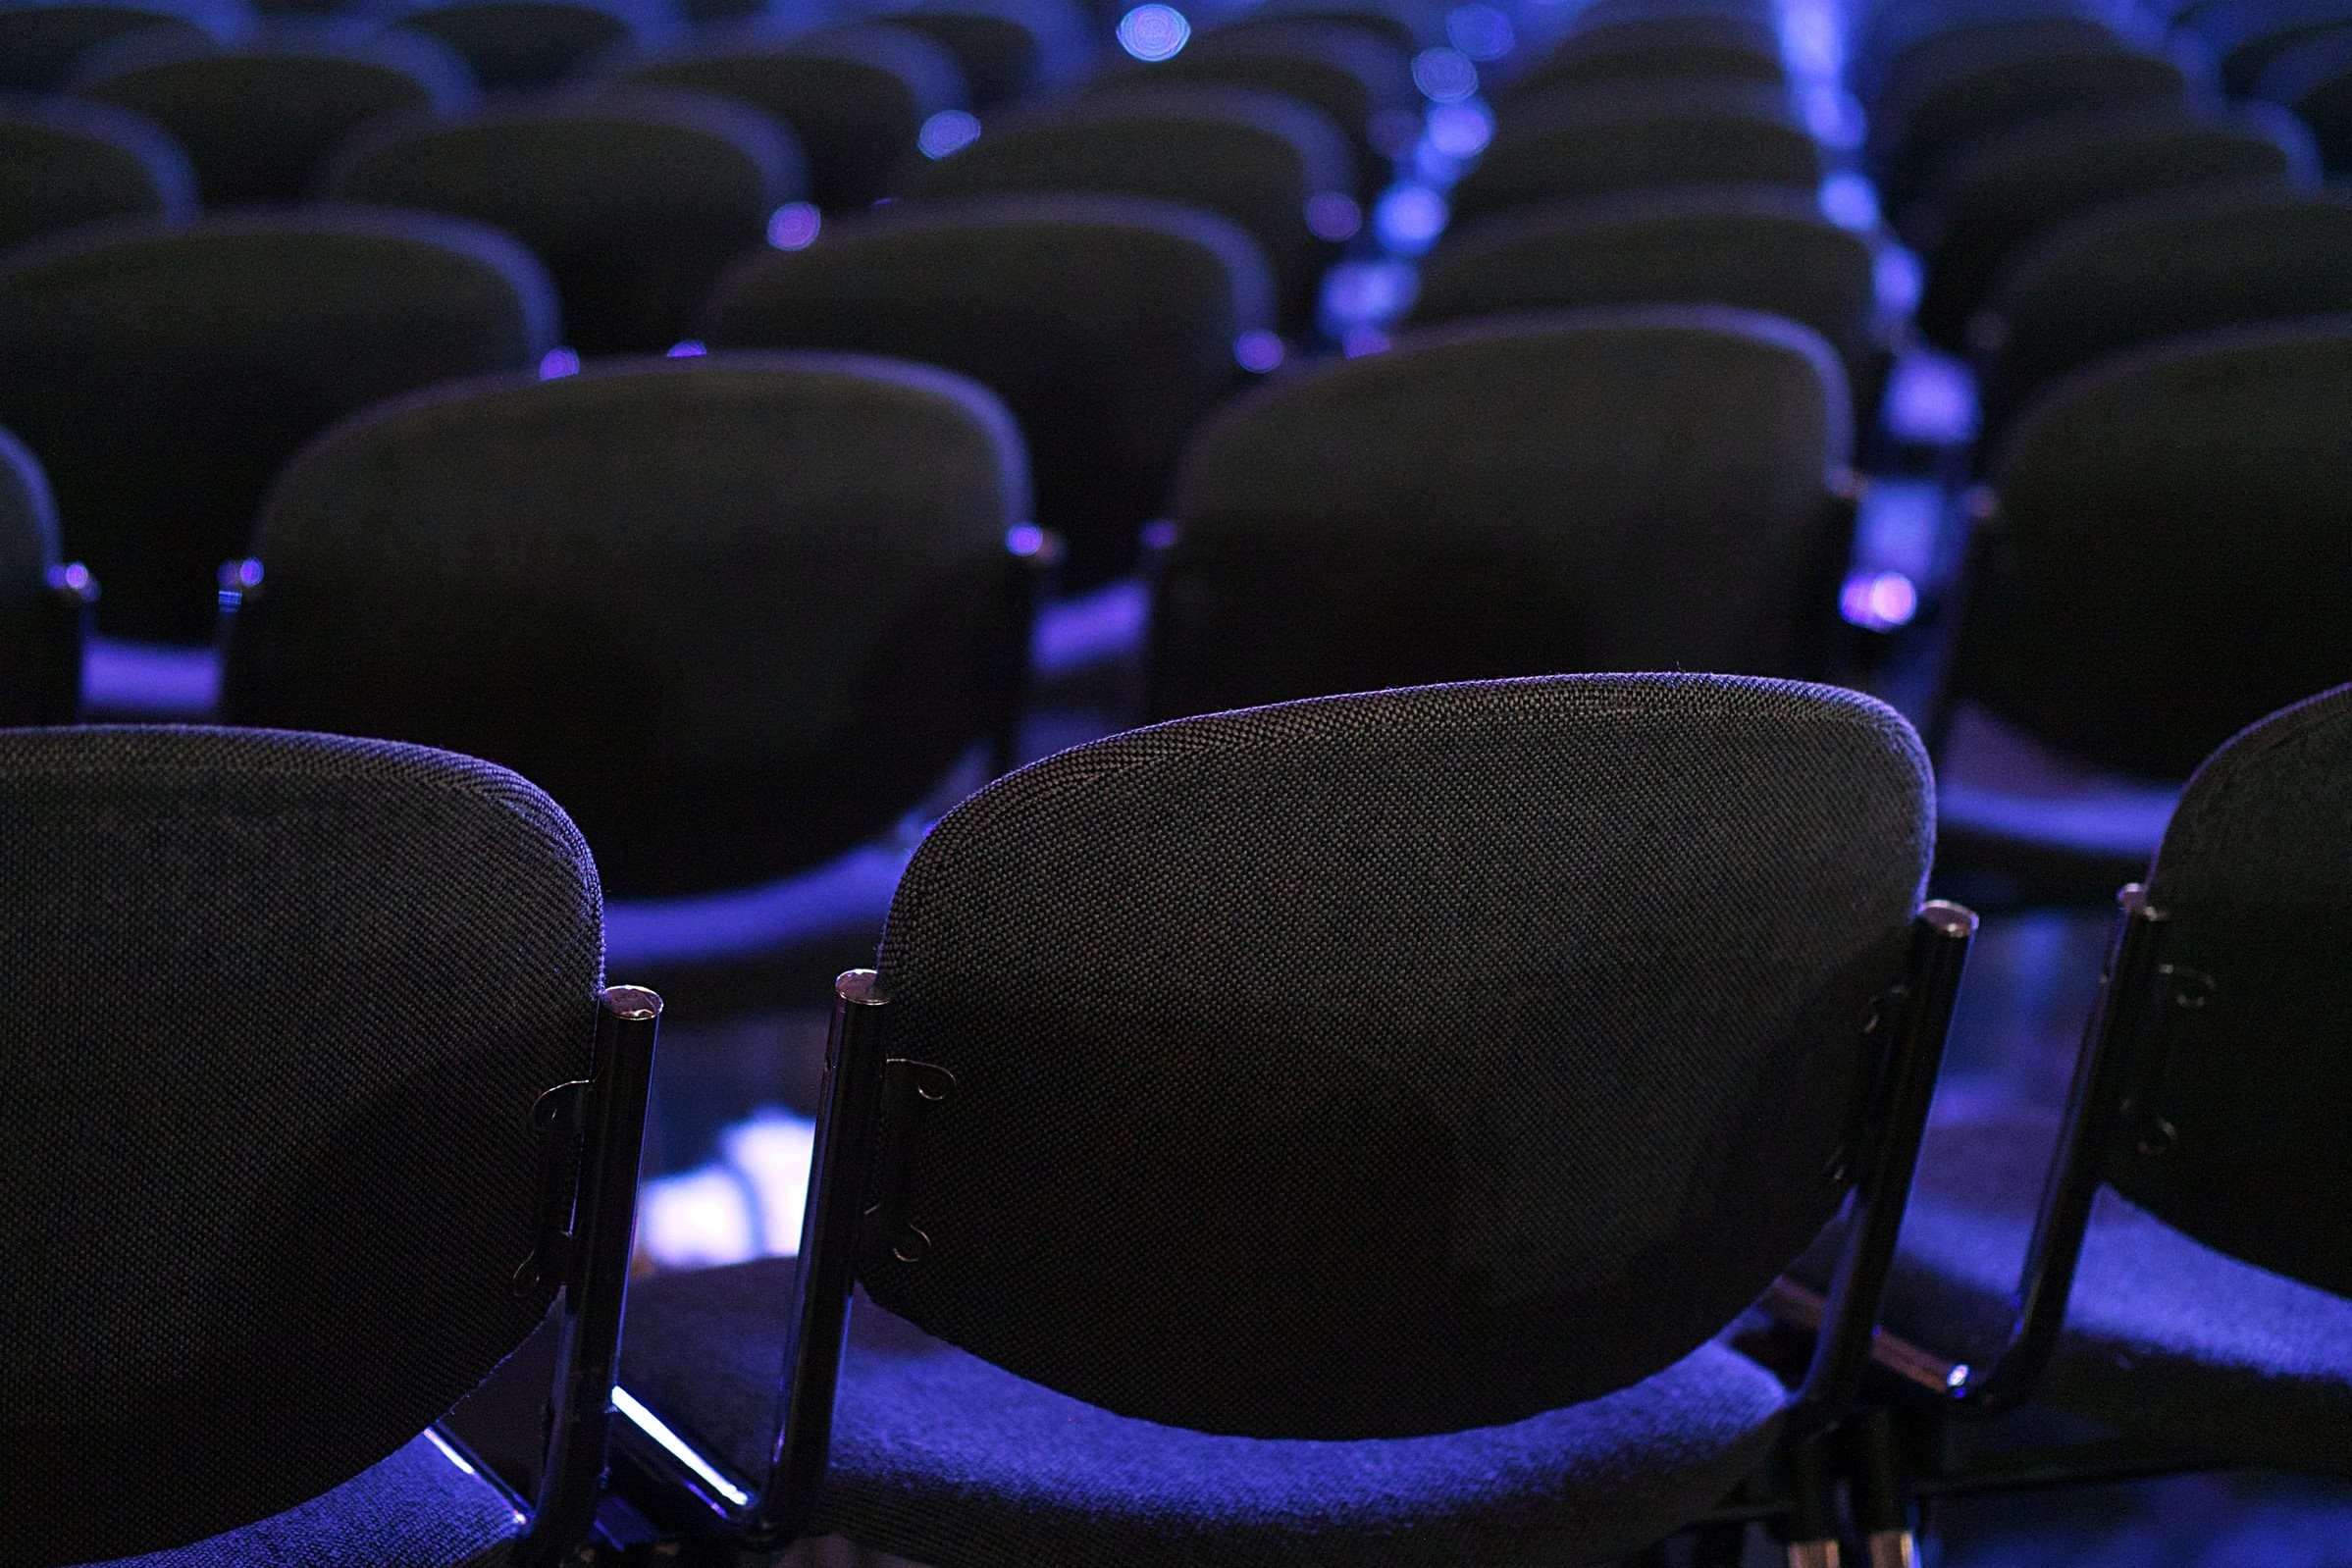 Empty chairs set out ready for a conference with blue lighting